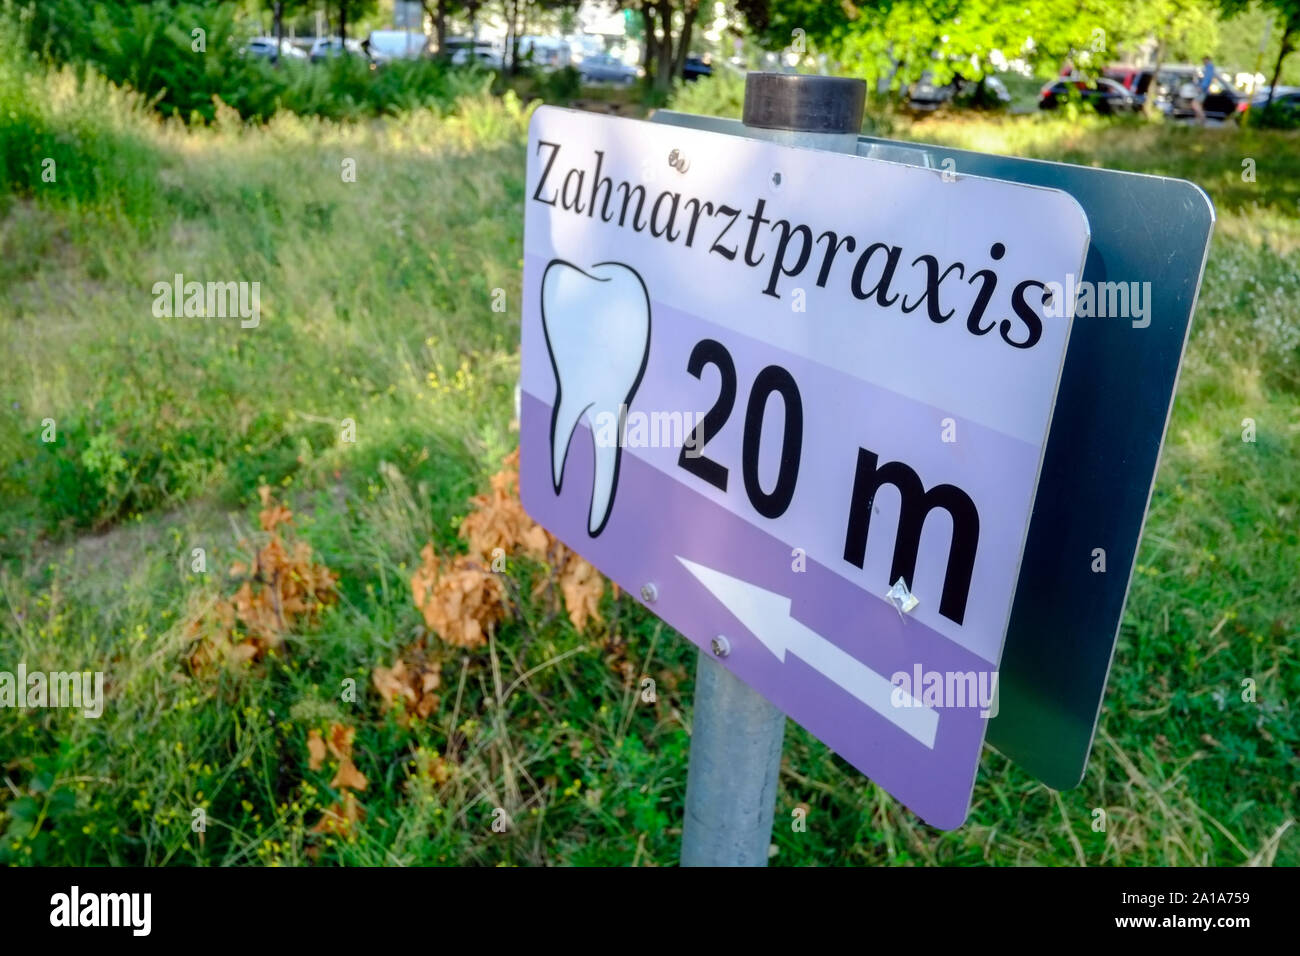 Germany. 13th Aug, 2019. A sign with the inscription 'Zahnarztpraxis 20 m' points the way in a park. Credit: Stefan Jaitner/dpa/Alamy Live News Stock Photo